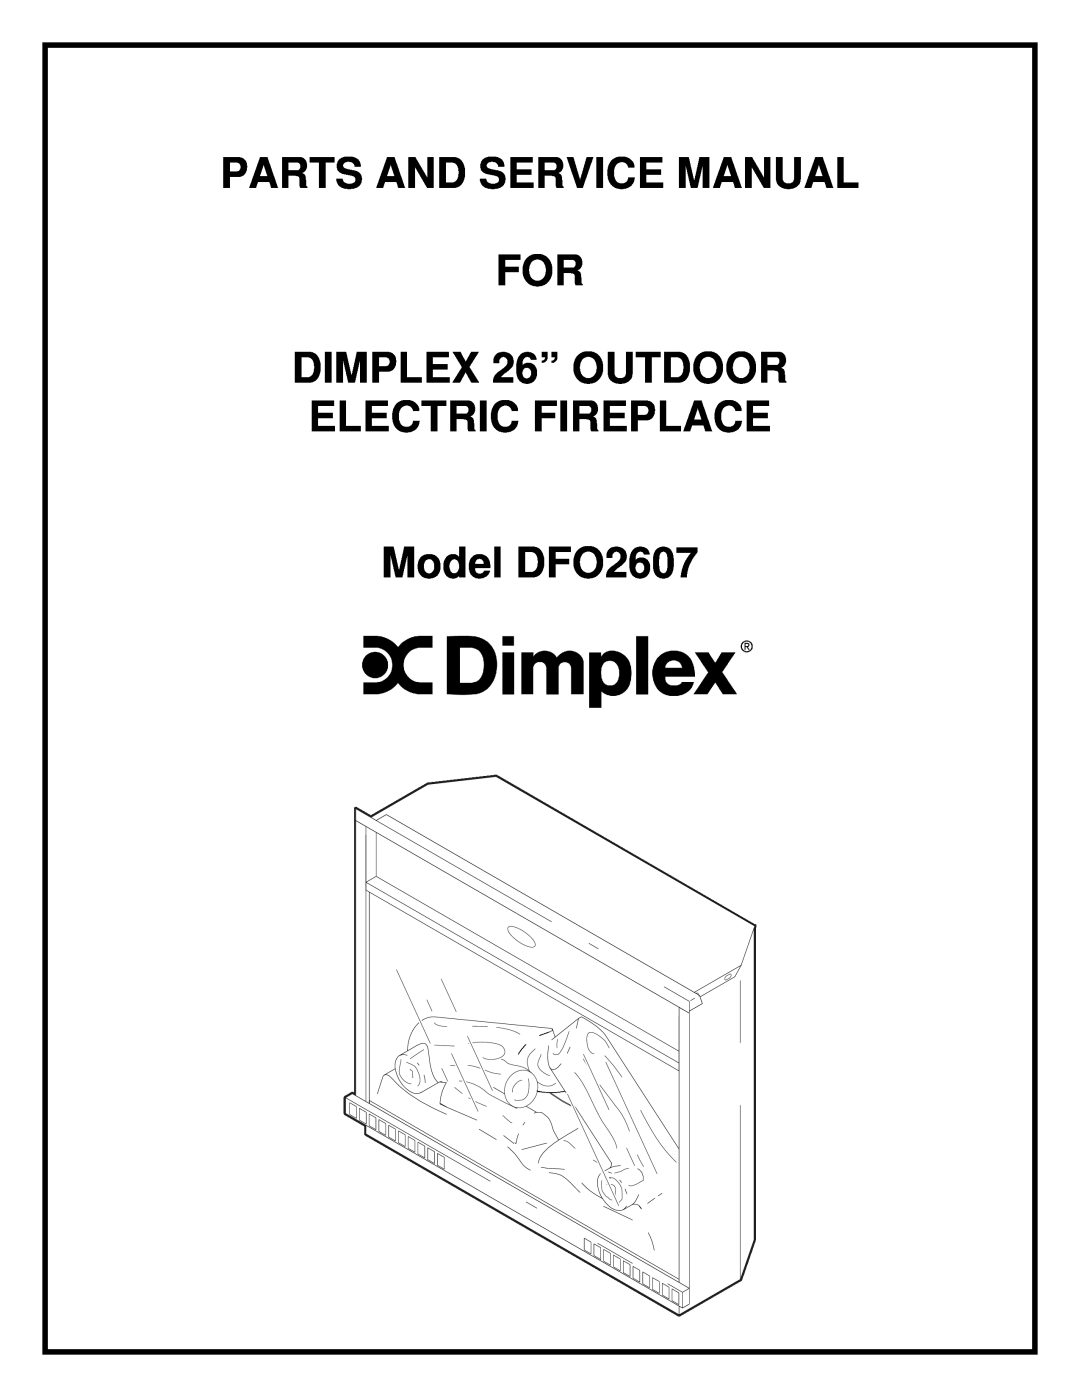 Dimplex service manual FOR DIMPLEX 26” OUTDOOR ELECTRIC FIREPLACE, Model DFO2607 